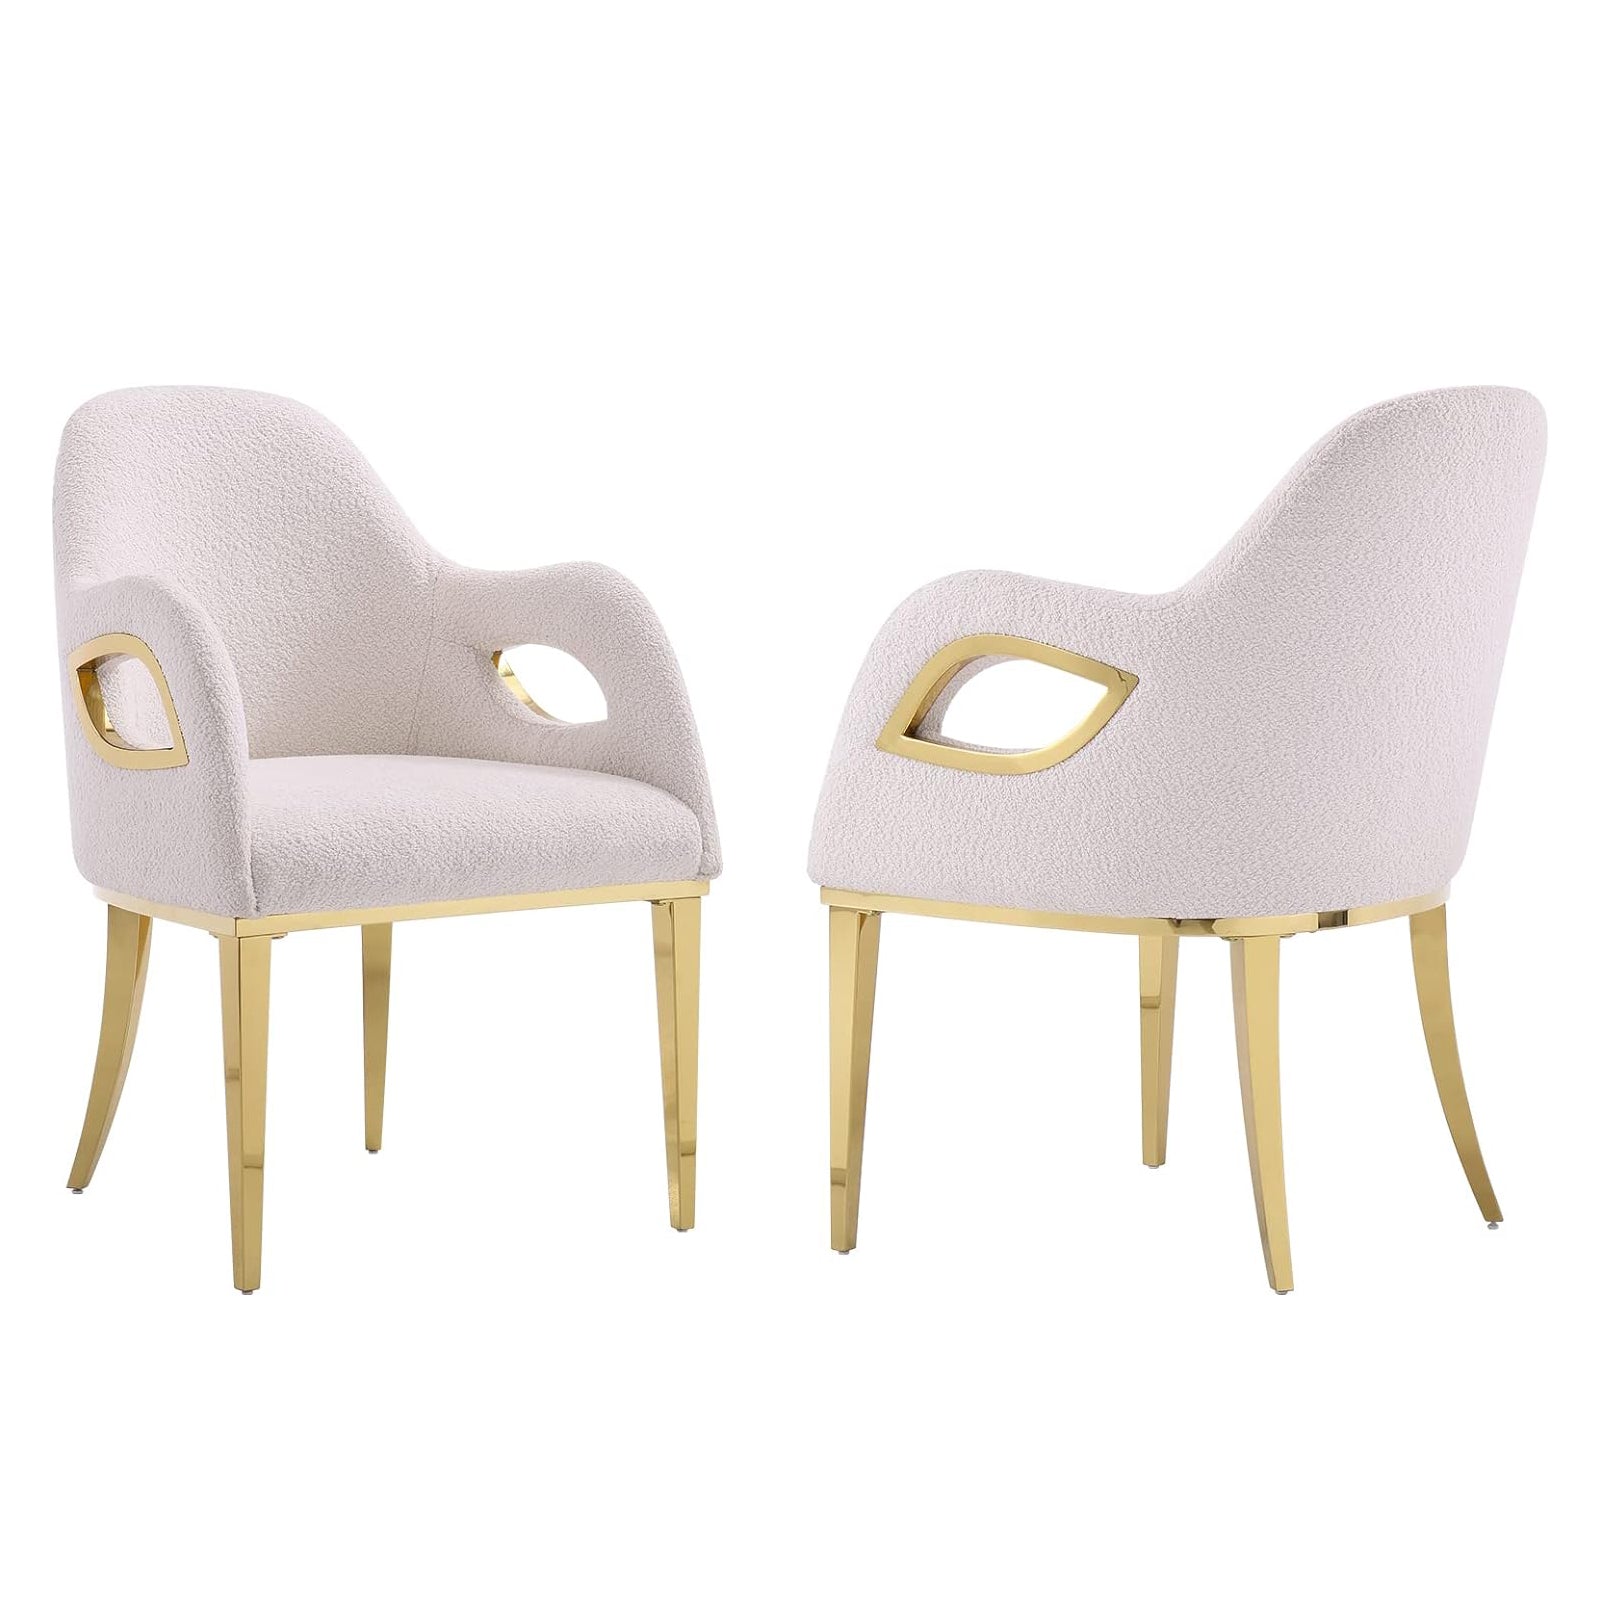 Embrace Modern Luxury with White Mohair Dining Chairs